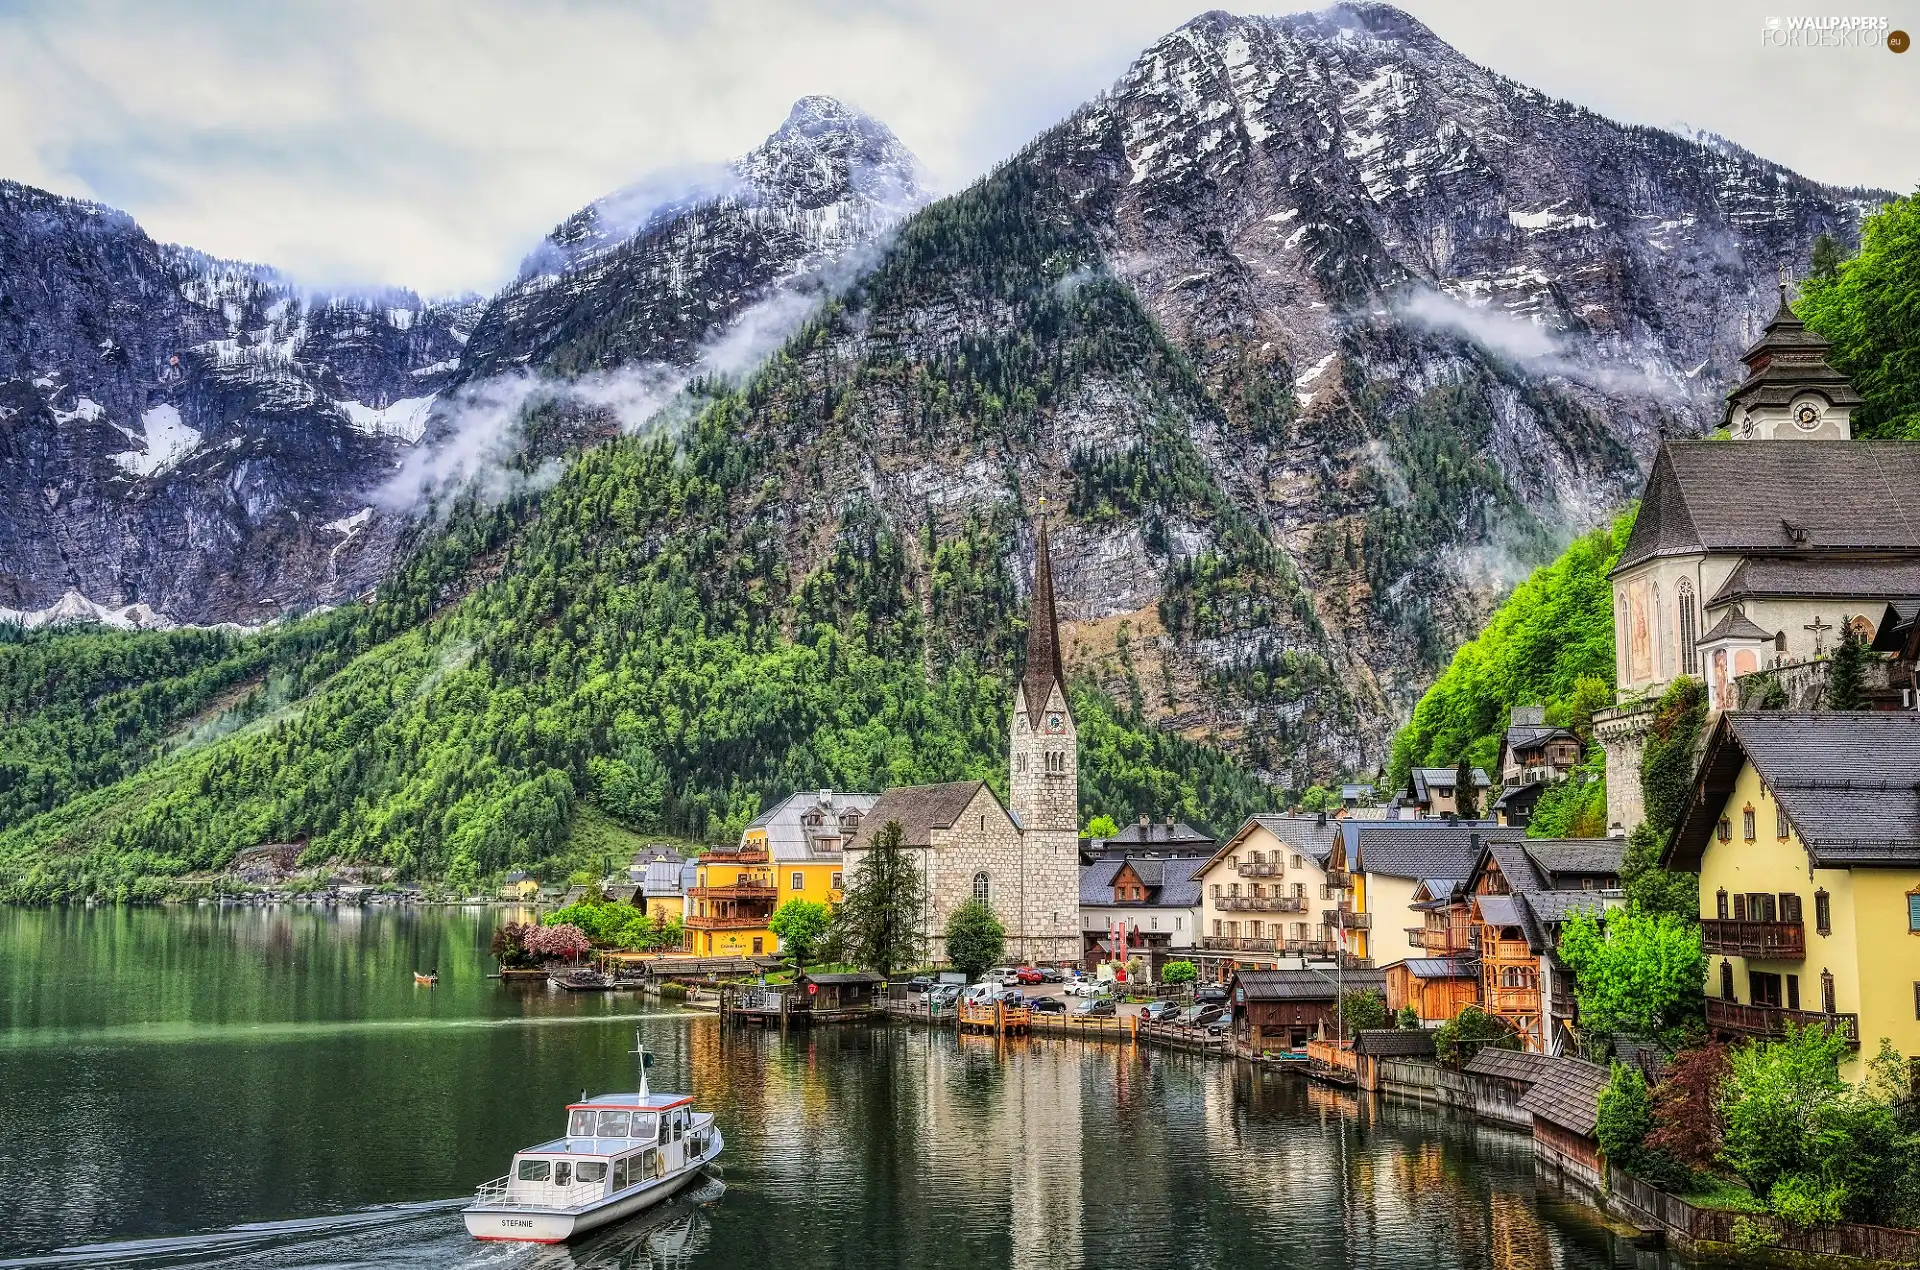 Houses, Austria, Mountains, Church, trees, Ship, Hallstattersee Lake, Hallstatt, Town, viewes, woods